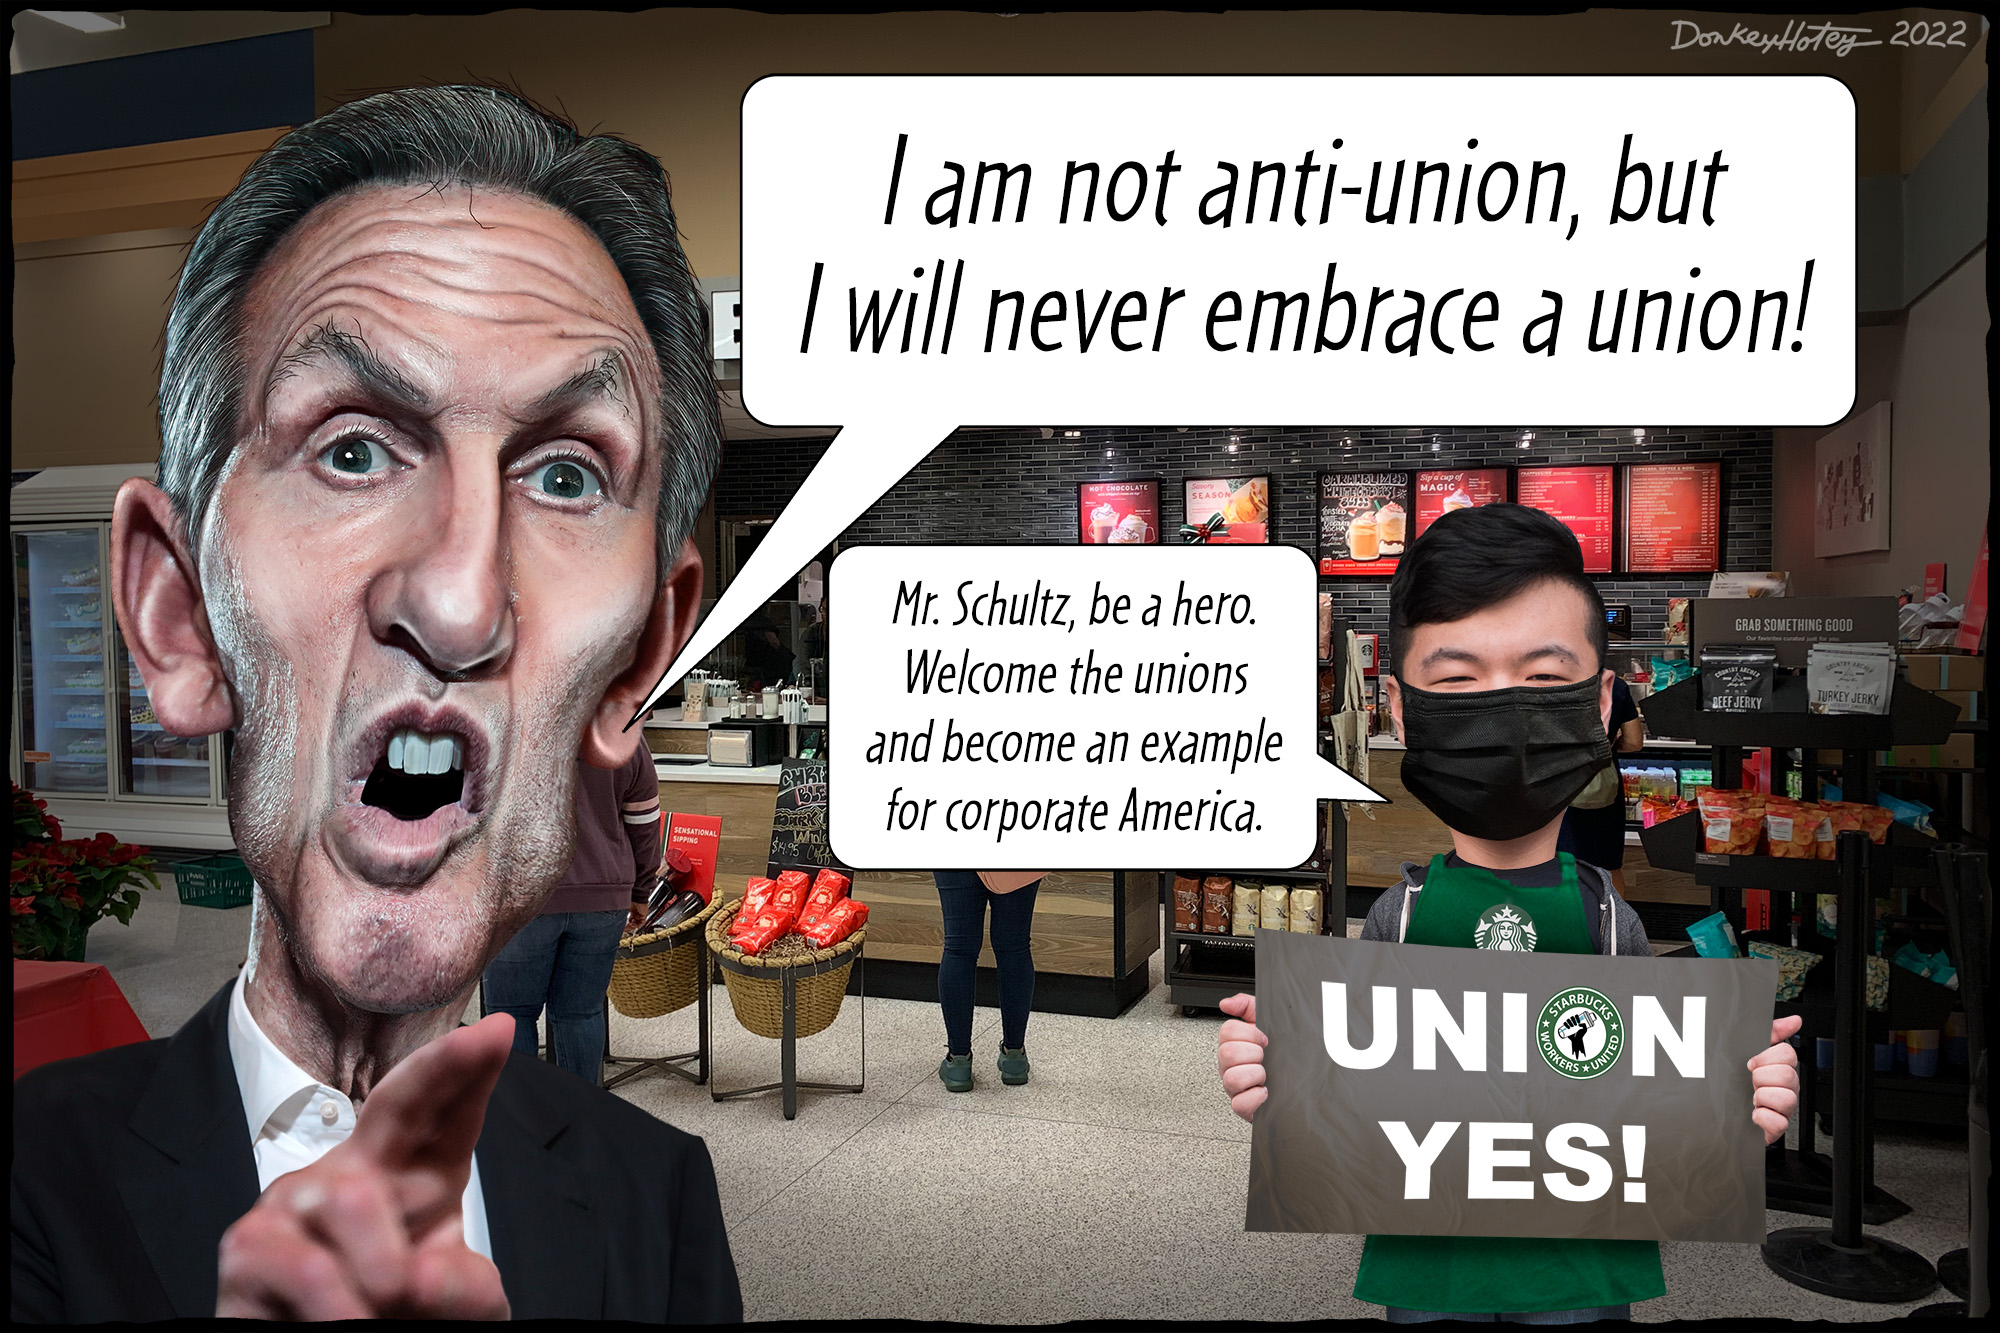 Starbucks CEO Should Show Corporations How to Deal With Unions